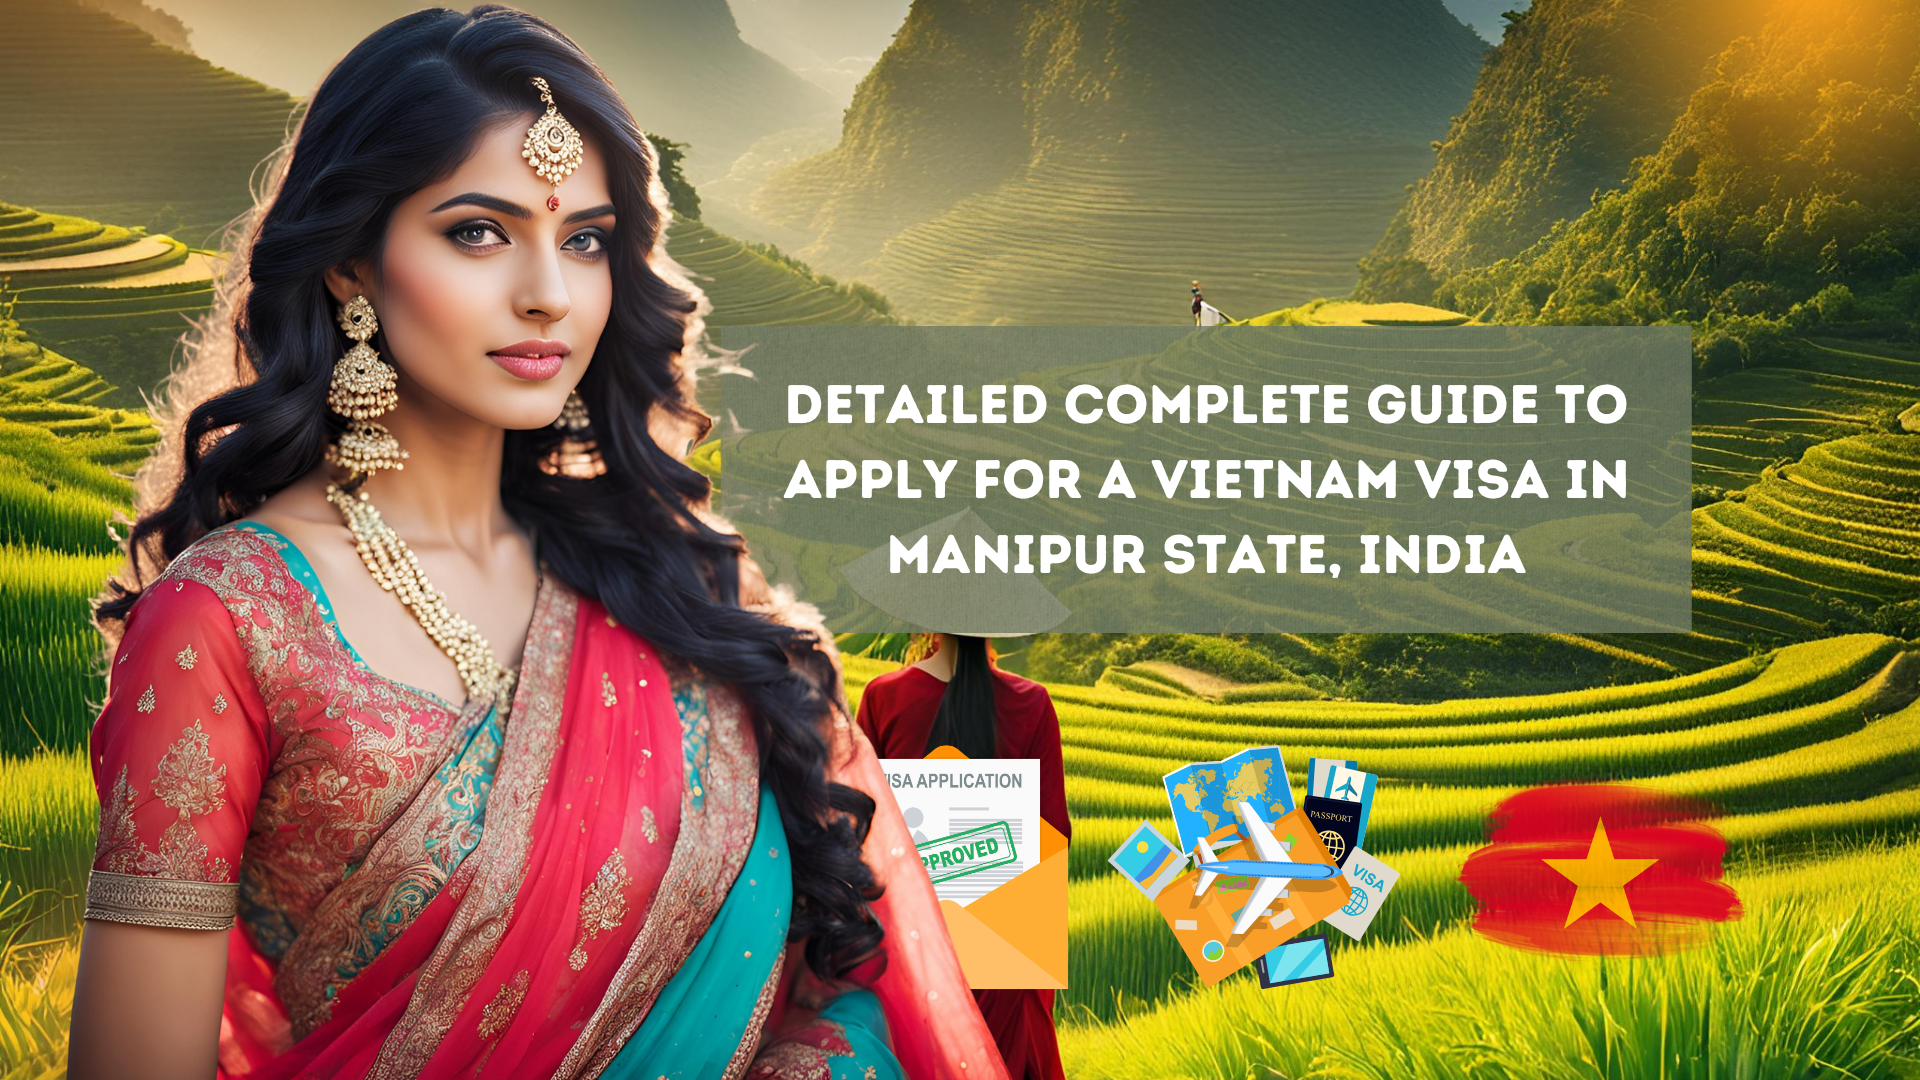 Detailed Complete Guide to Apply for a Vietnam Visa in Manipur State, India